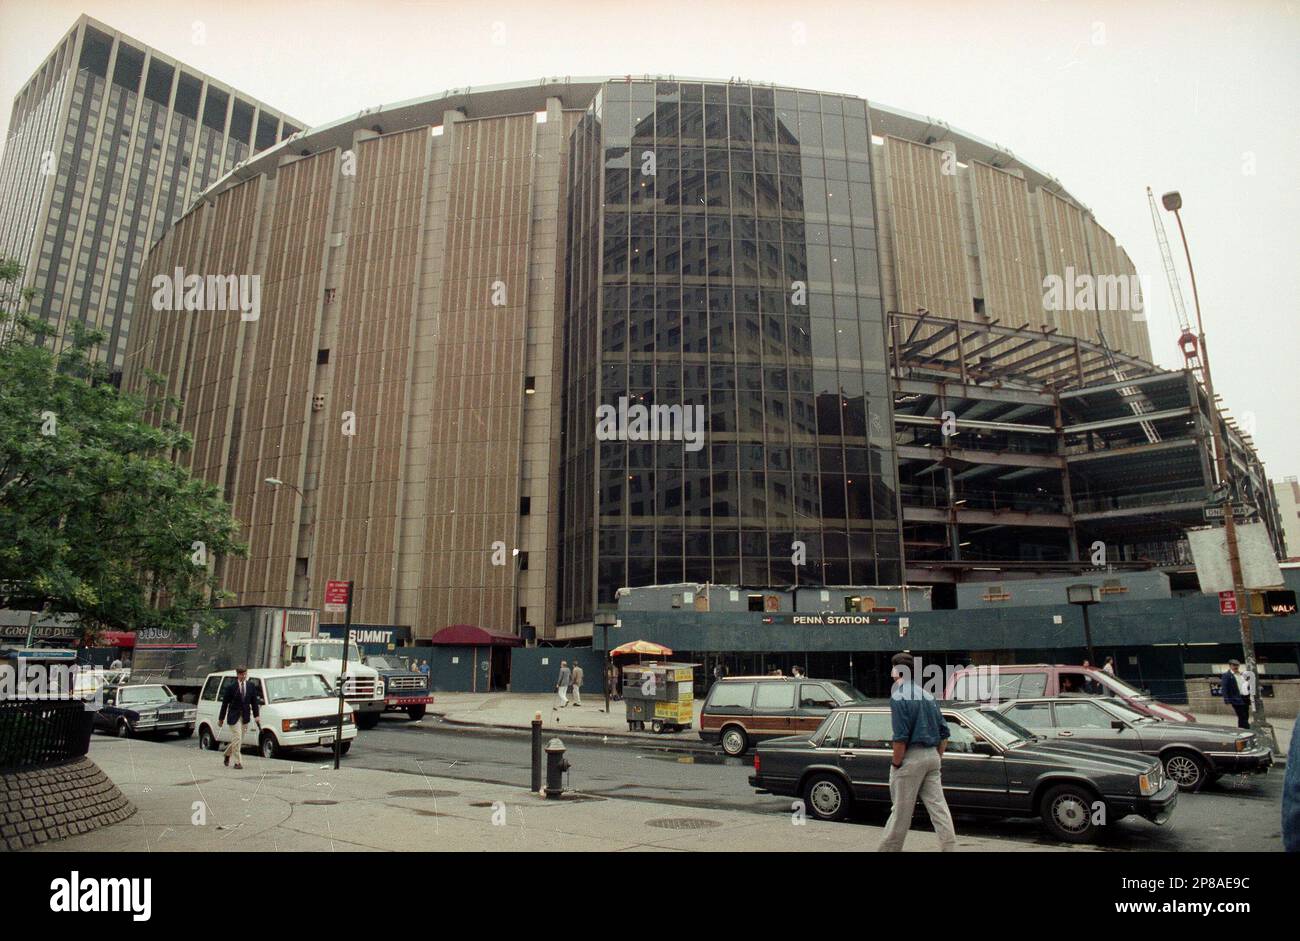 FILE- In this July 1990 file photo, New York City's Madison Square Garden rises above the corner of 33rd Street and Eight Avenue. A new report by the New York Police Department states that managers and developers of high-profile skyscrapers, sports stadiums and other structures in the city need to take more steps to guard against terrorist attacks. "The same qualities that make the city's buildings recognized icons of design, culture and commerce also make them continuous targets of terrorism," Police Commissioner Raymond Kelly said in a foreword for the report. (AP Photo/Marty Lederhandler, F Stock Photo